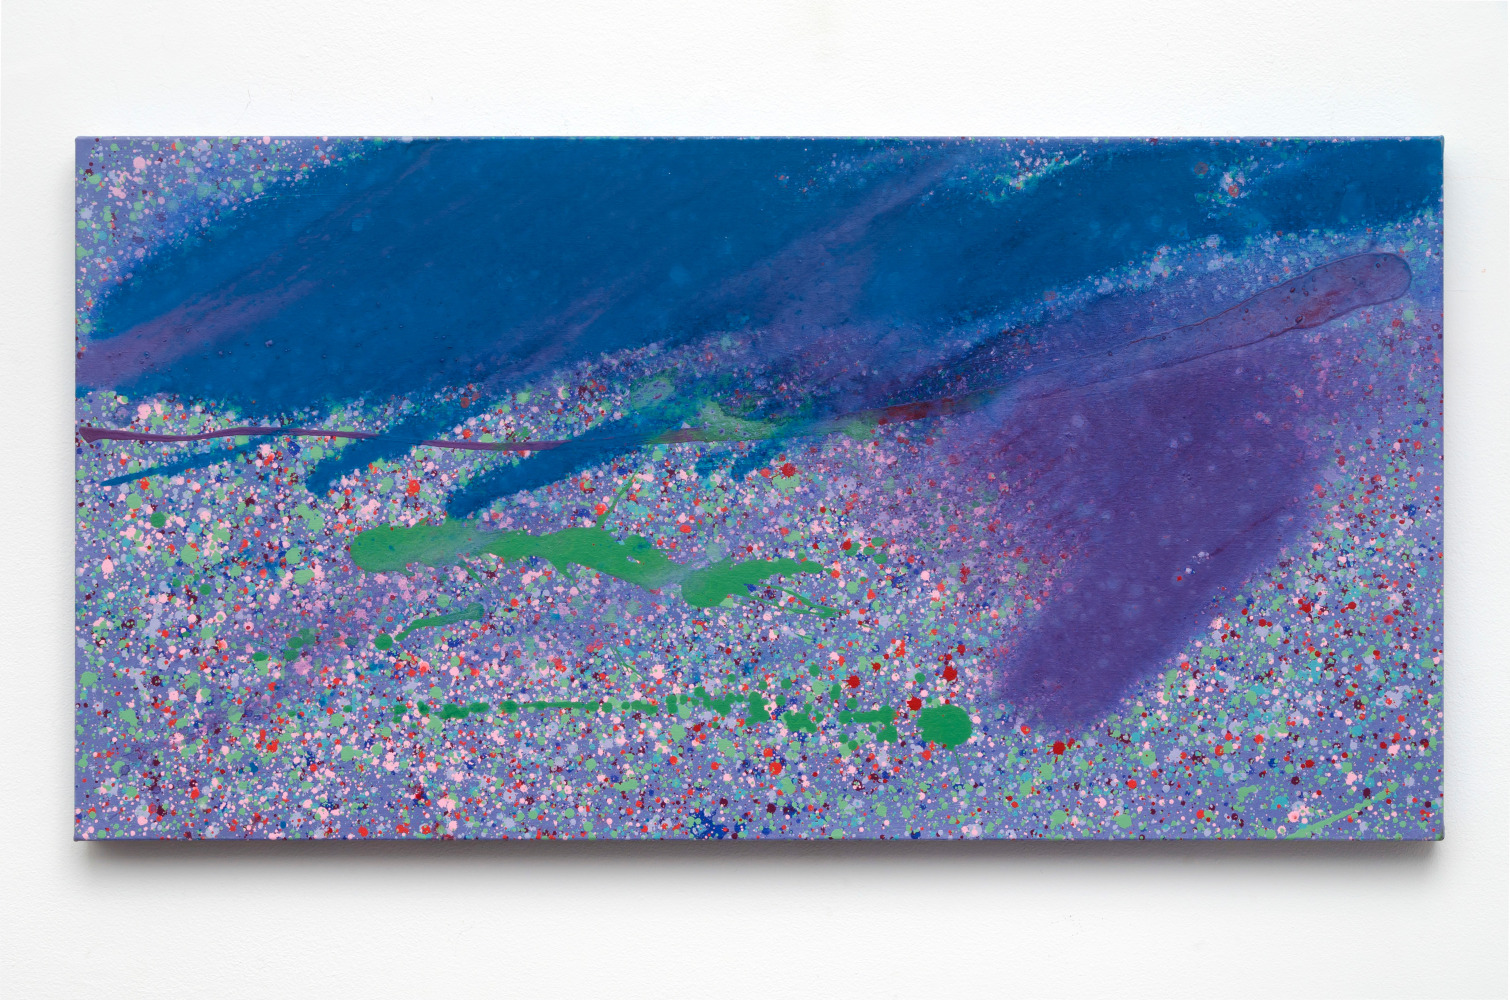 Untitled (B), c. 1990s acrylic on canvas 20 x 40 inches; 50.8 x 101.6 centimeters LSFA# 14005